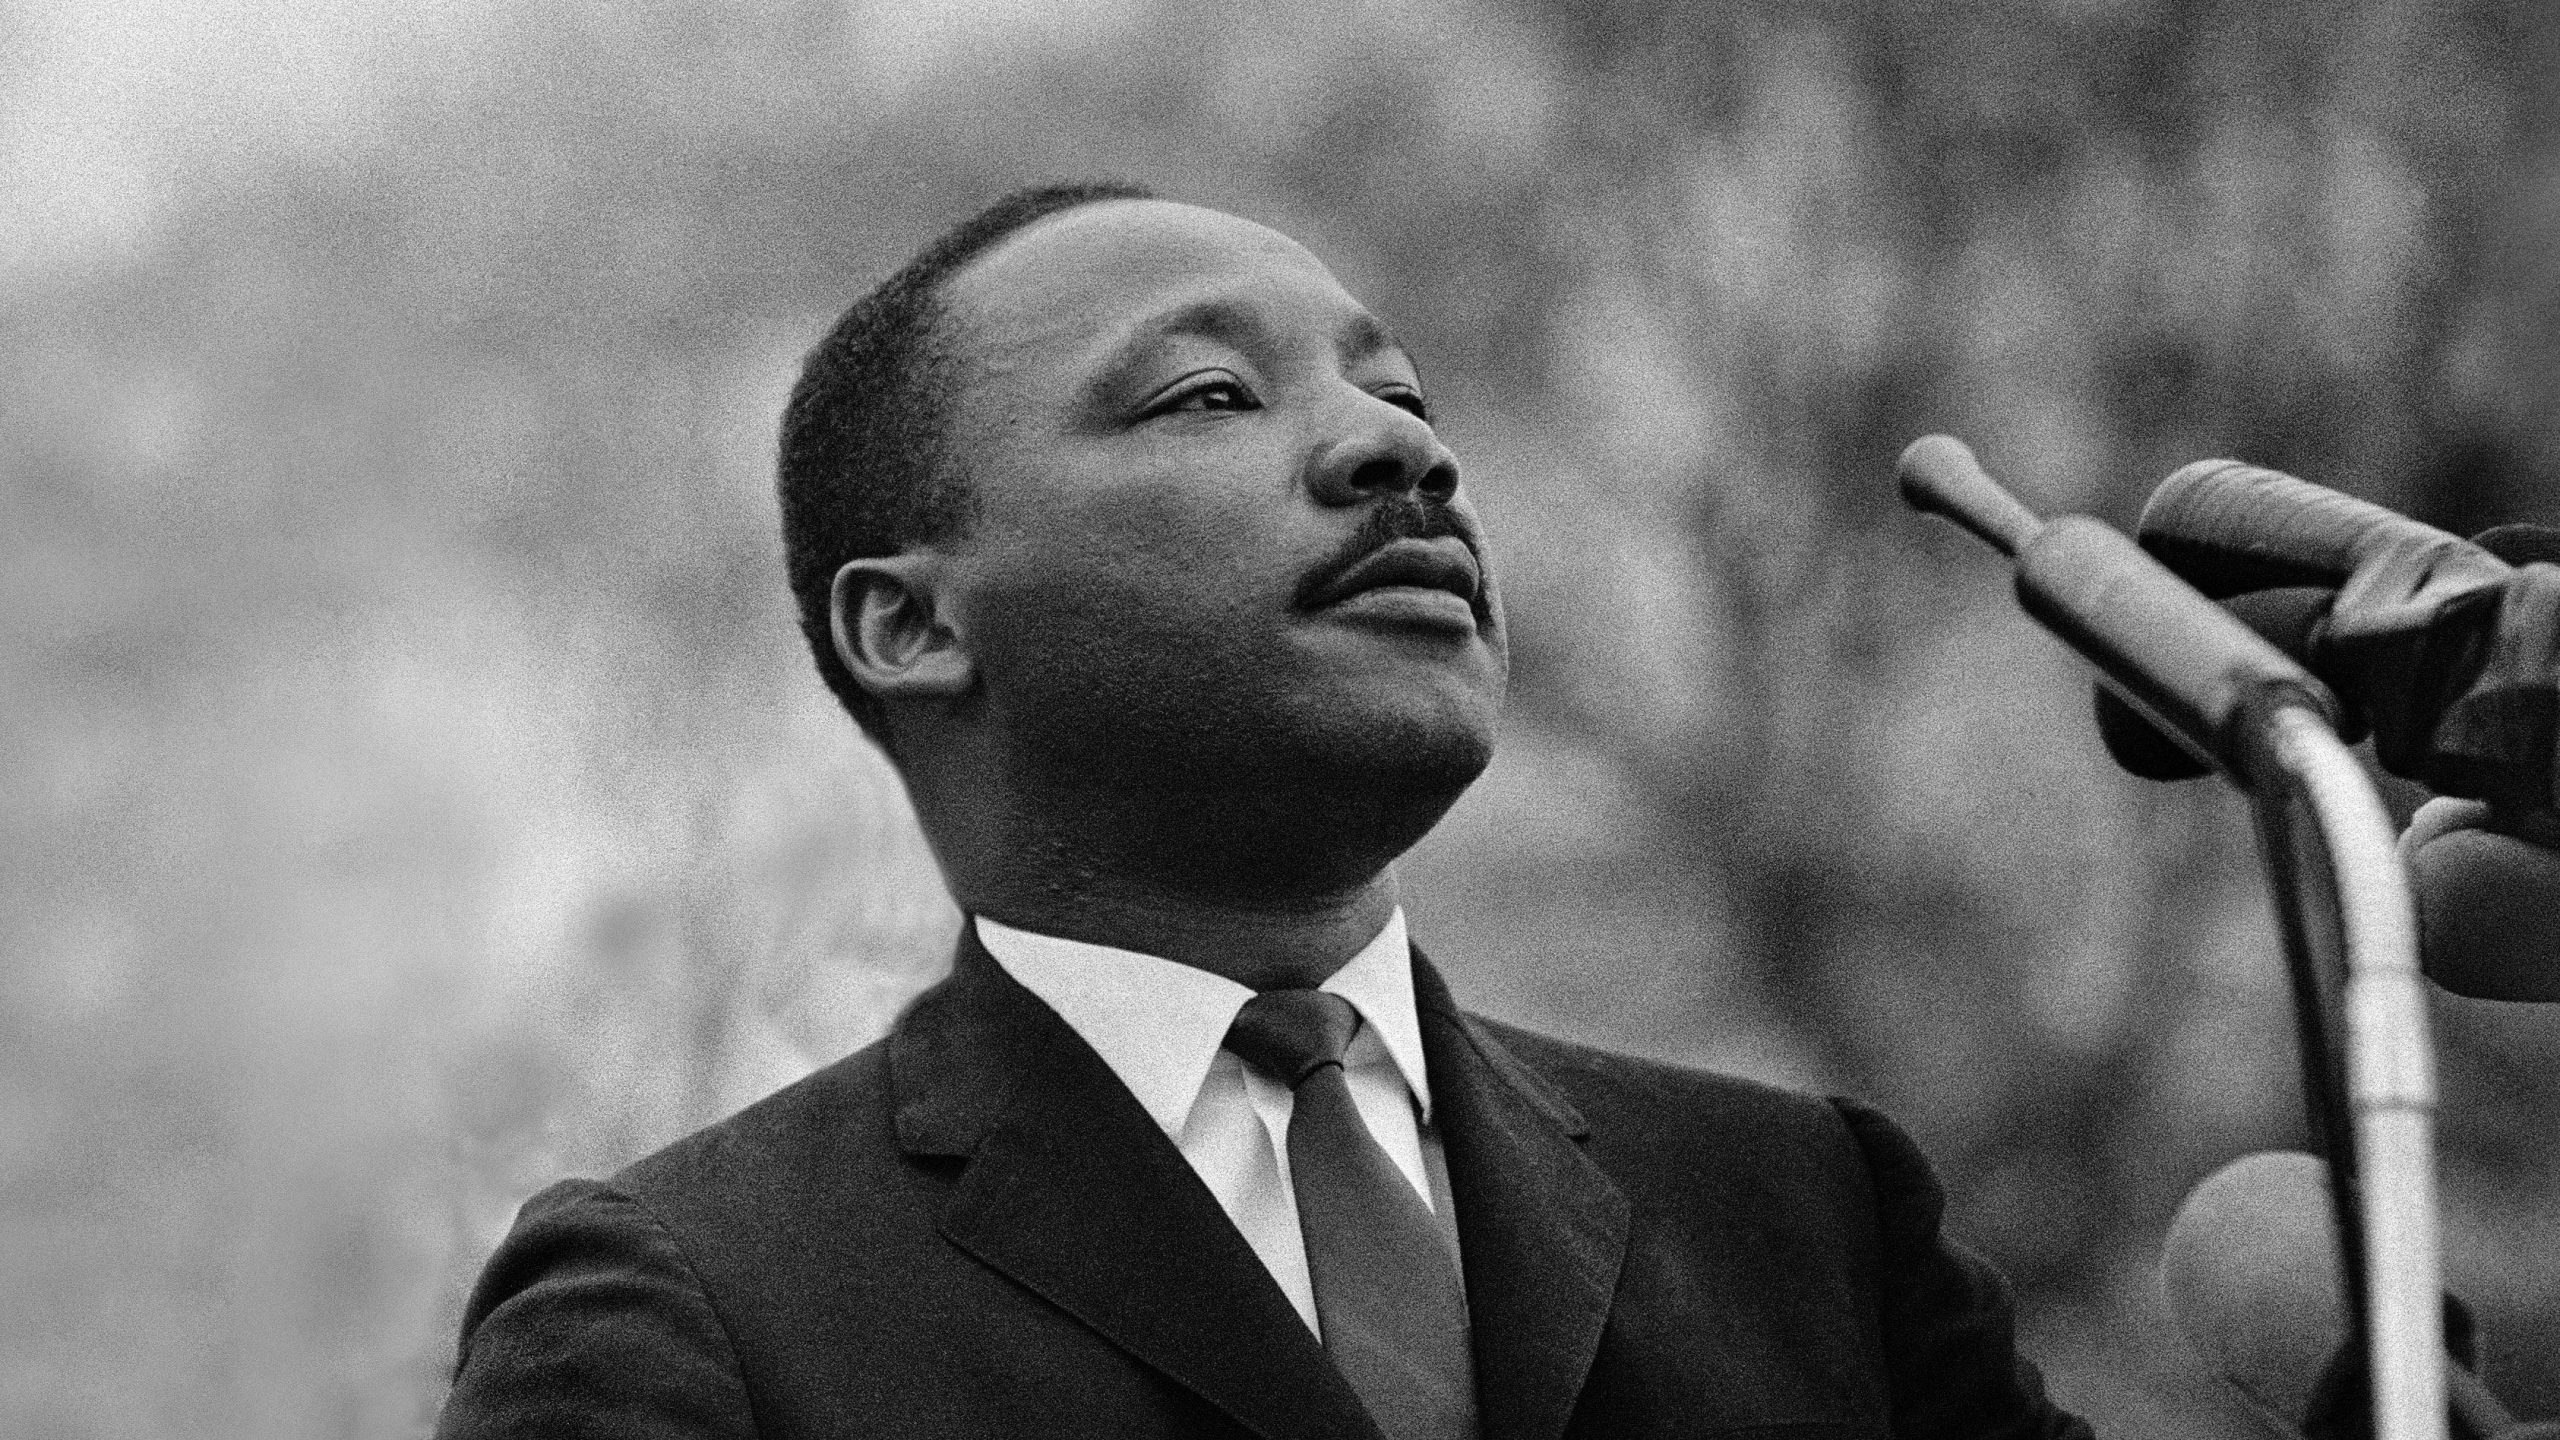 Exploring the Life of a Leader: 5 Facts About Martin Luther King Jr.